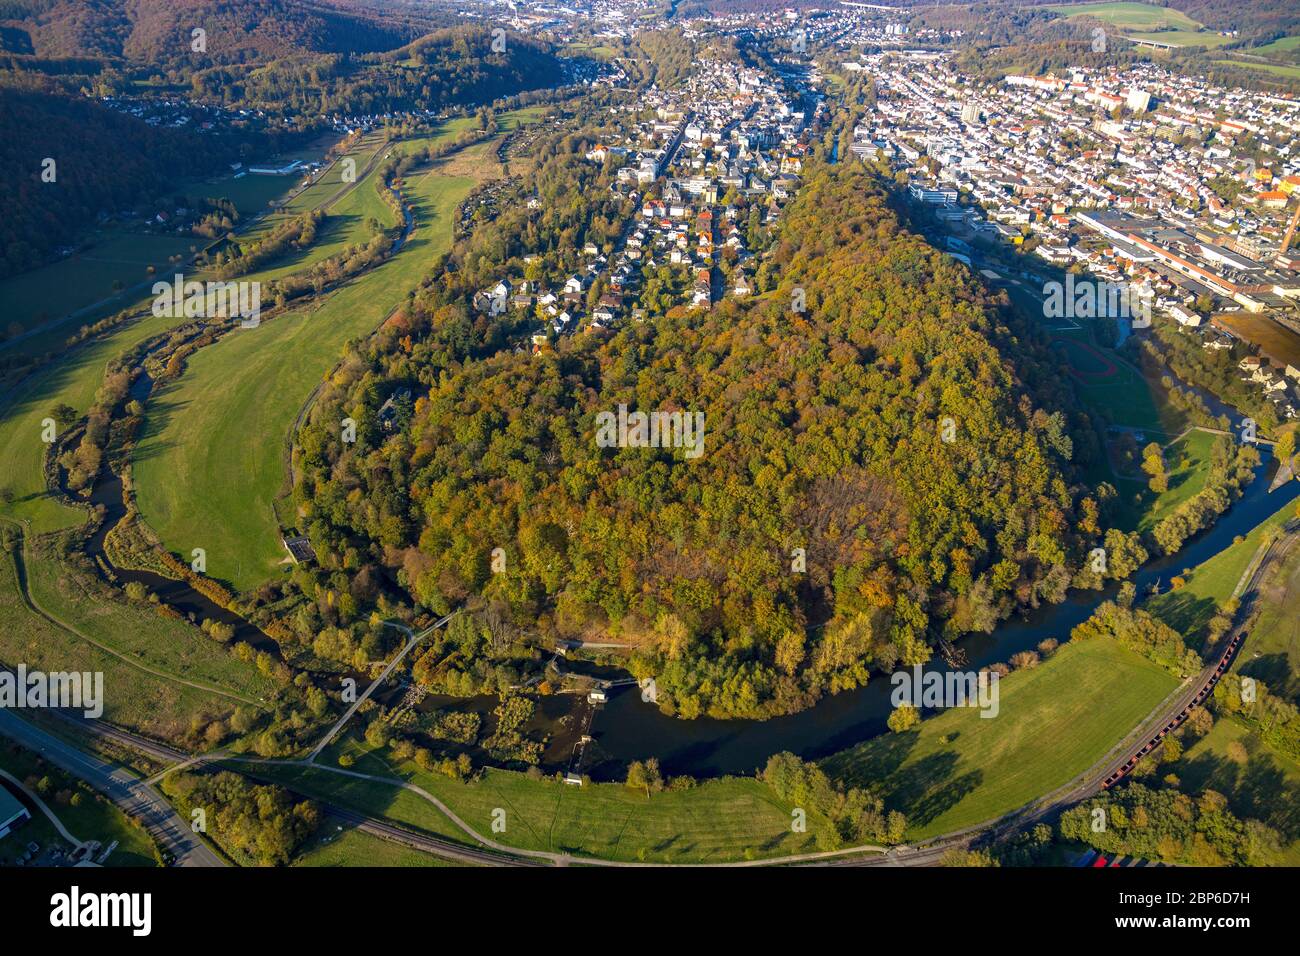 Aerial view, town view Wennigloh in forested autumn colors, entwined by the Eichholz forest and the river Ruhr, Arnsberg, Sauerland, North Rhine-Westphalia, Germany Stock Photo